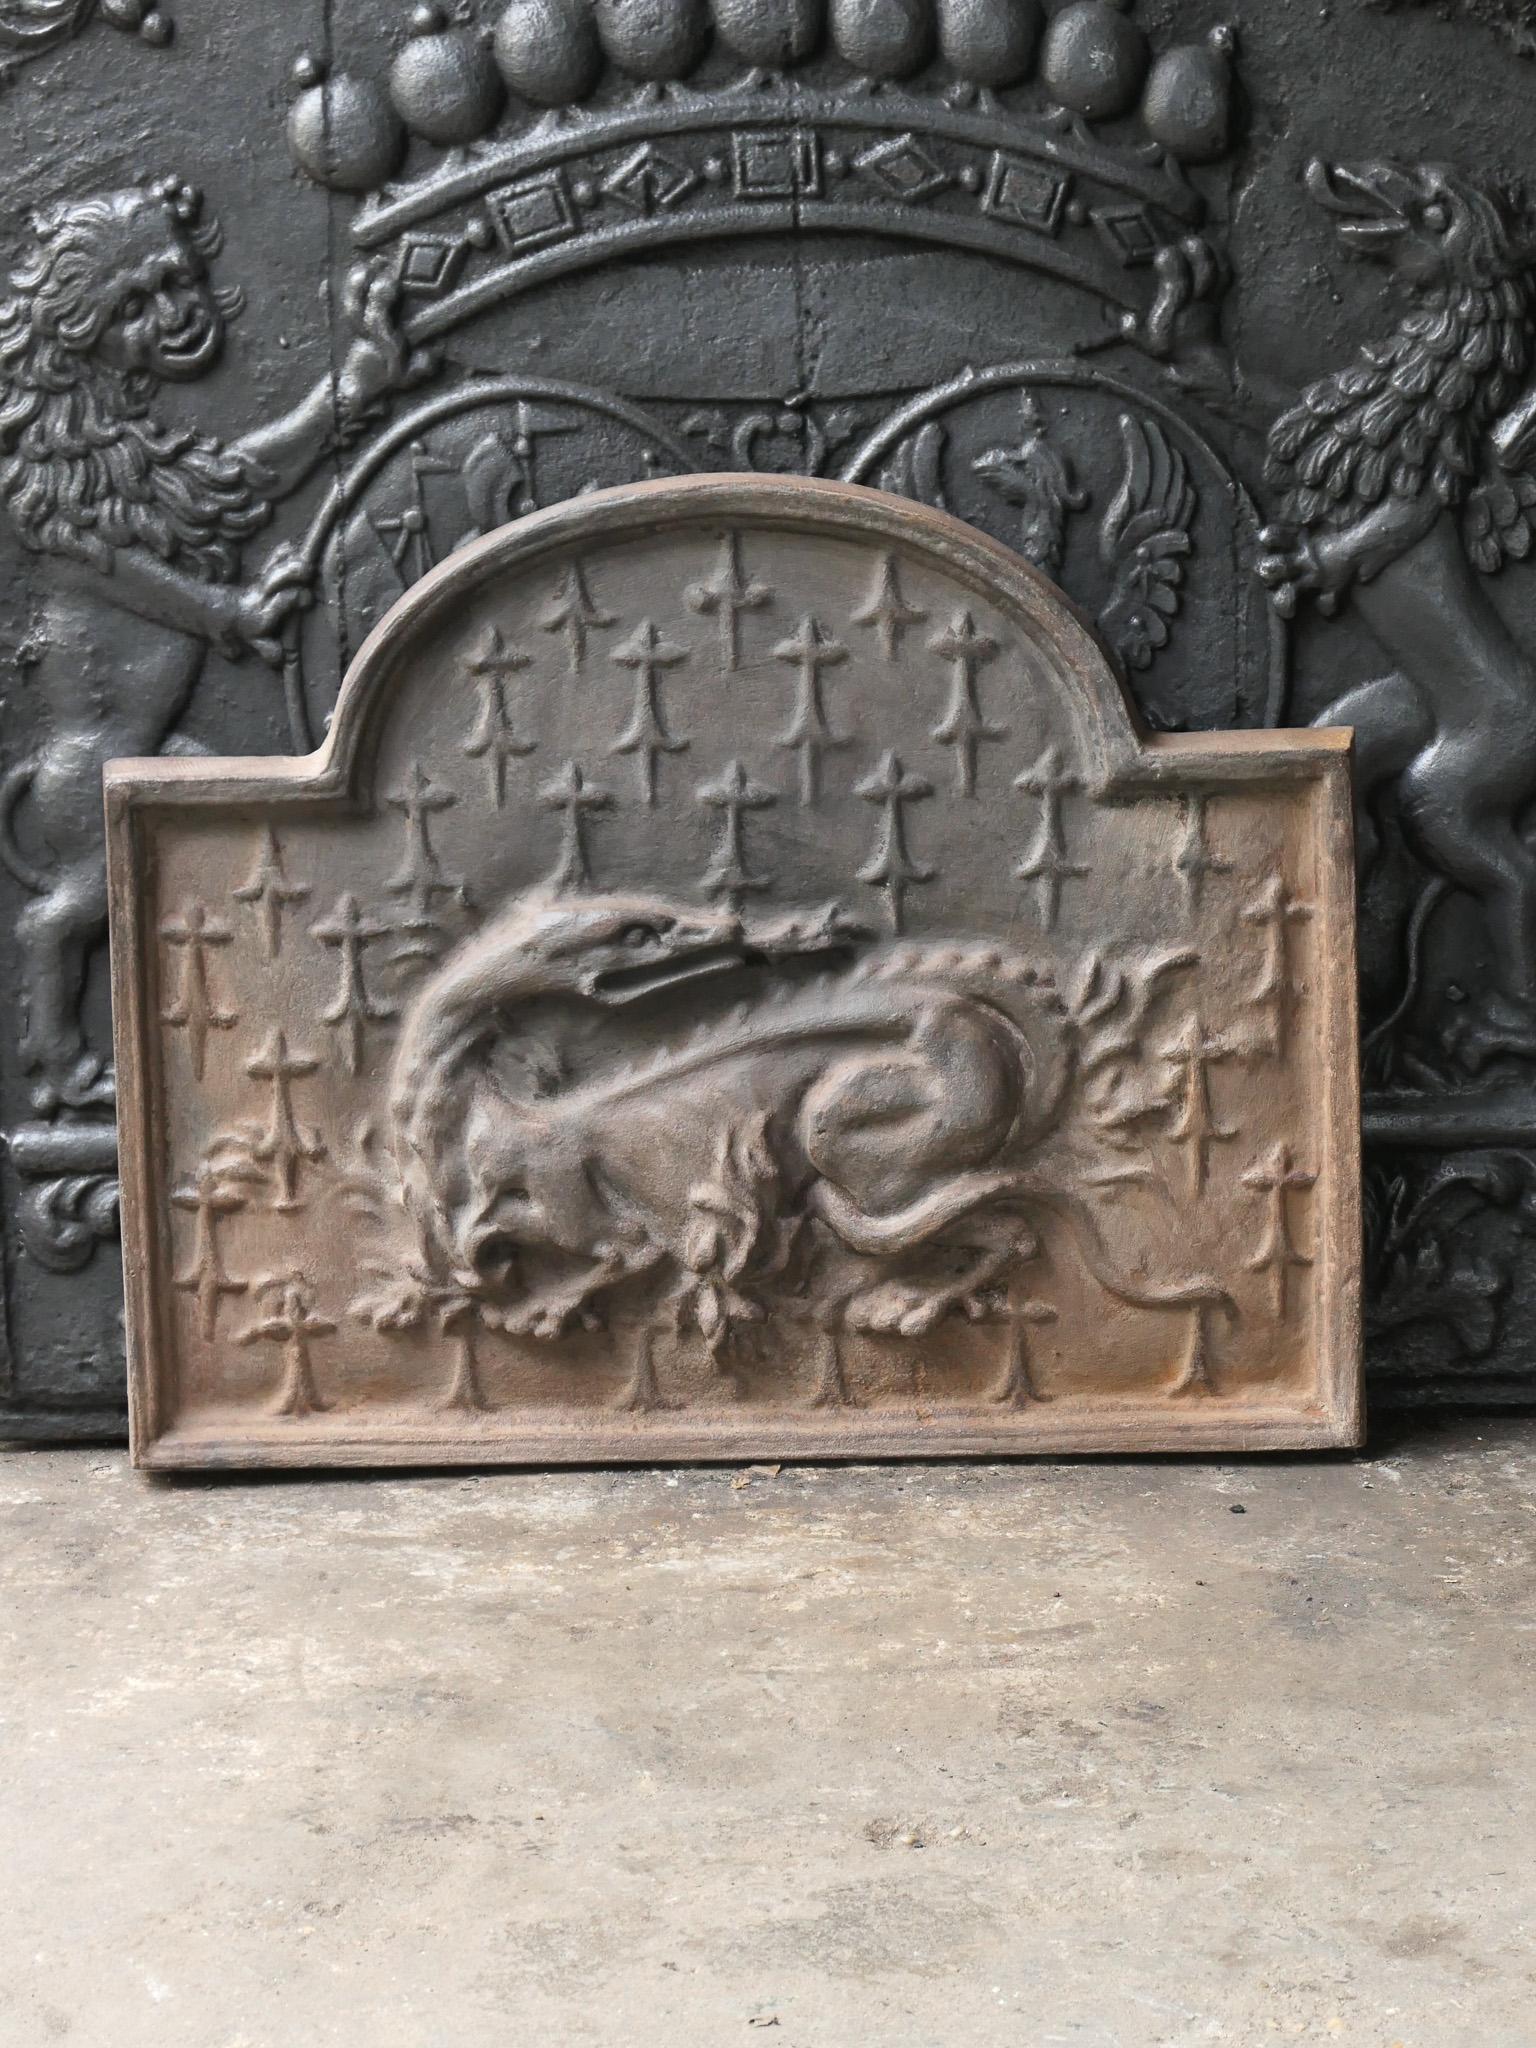 20th century French Renaissance style fireback with the salamander. The salamander is symbol of King François I, who was King of France from 1515 till 1547.

The fireback is made of cast iron and has a natural brown patina. Upon request it can be